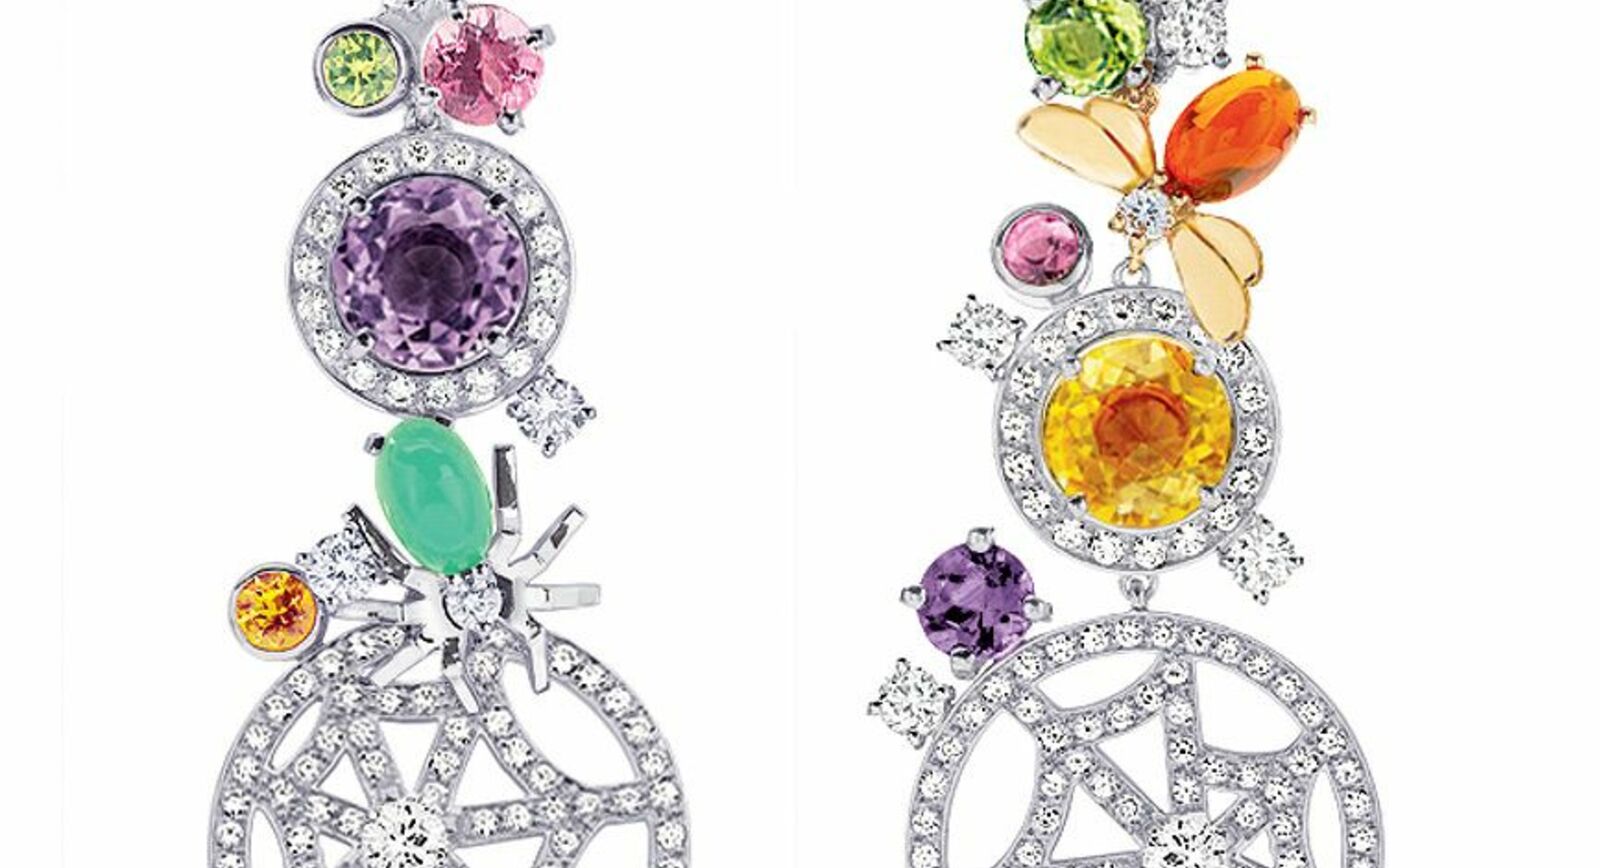 ANATOMY OF A JEWEL: A Game of Seduction by Chaumet